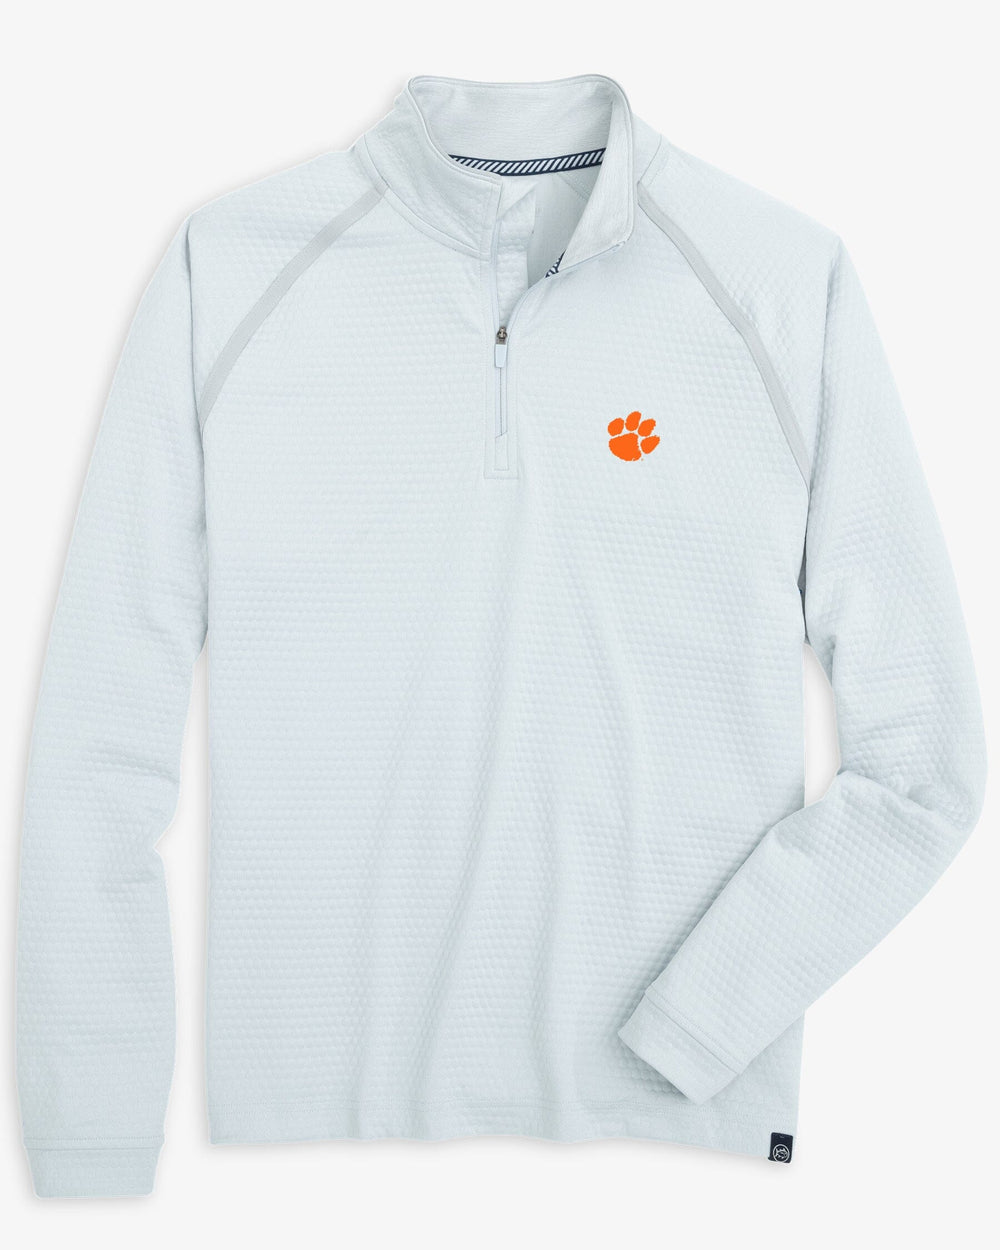 The front view of the Clemson Tigers Scuttle Heather Quarter Zip by Southern Tide - Heather Slate Grey